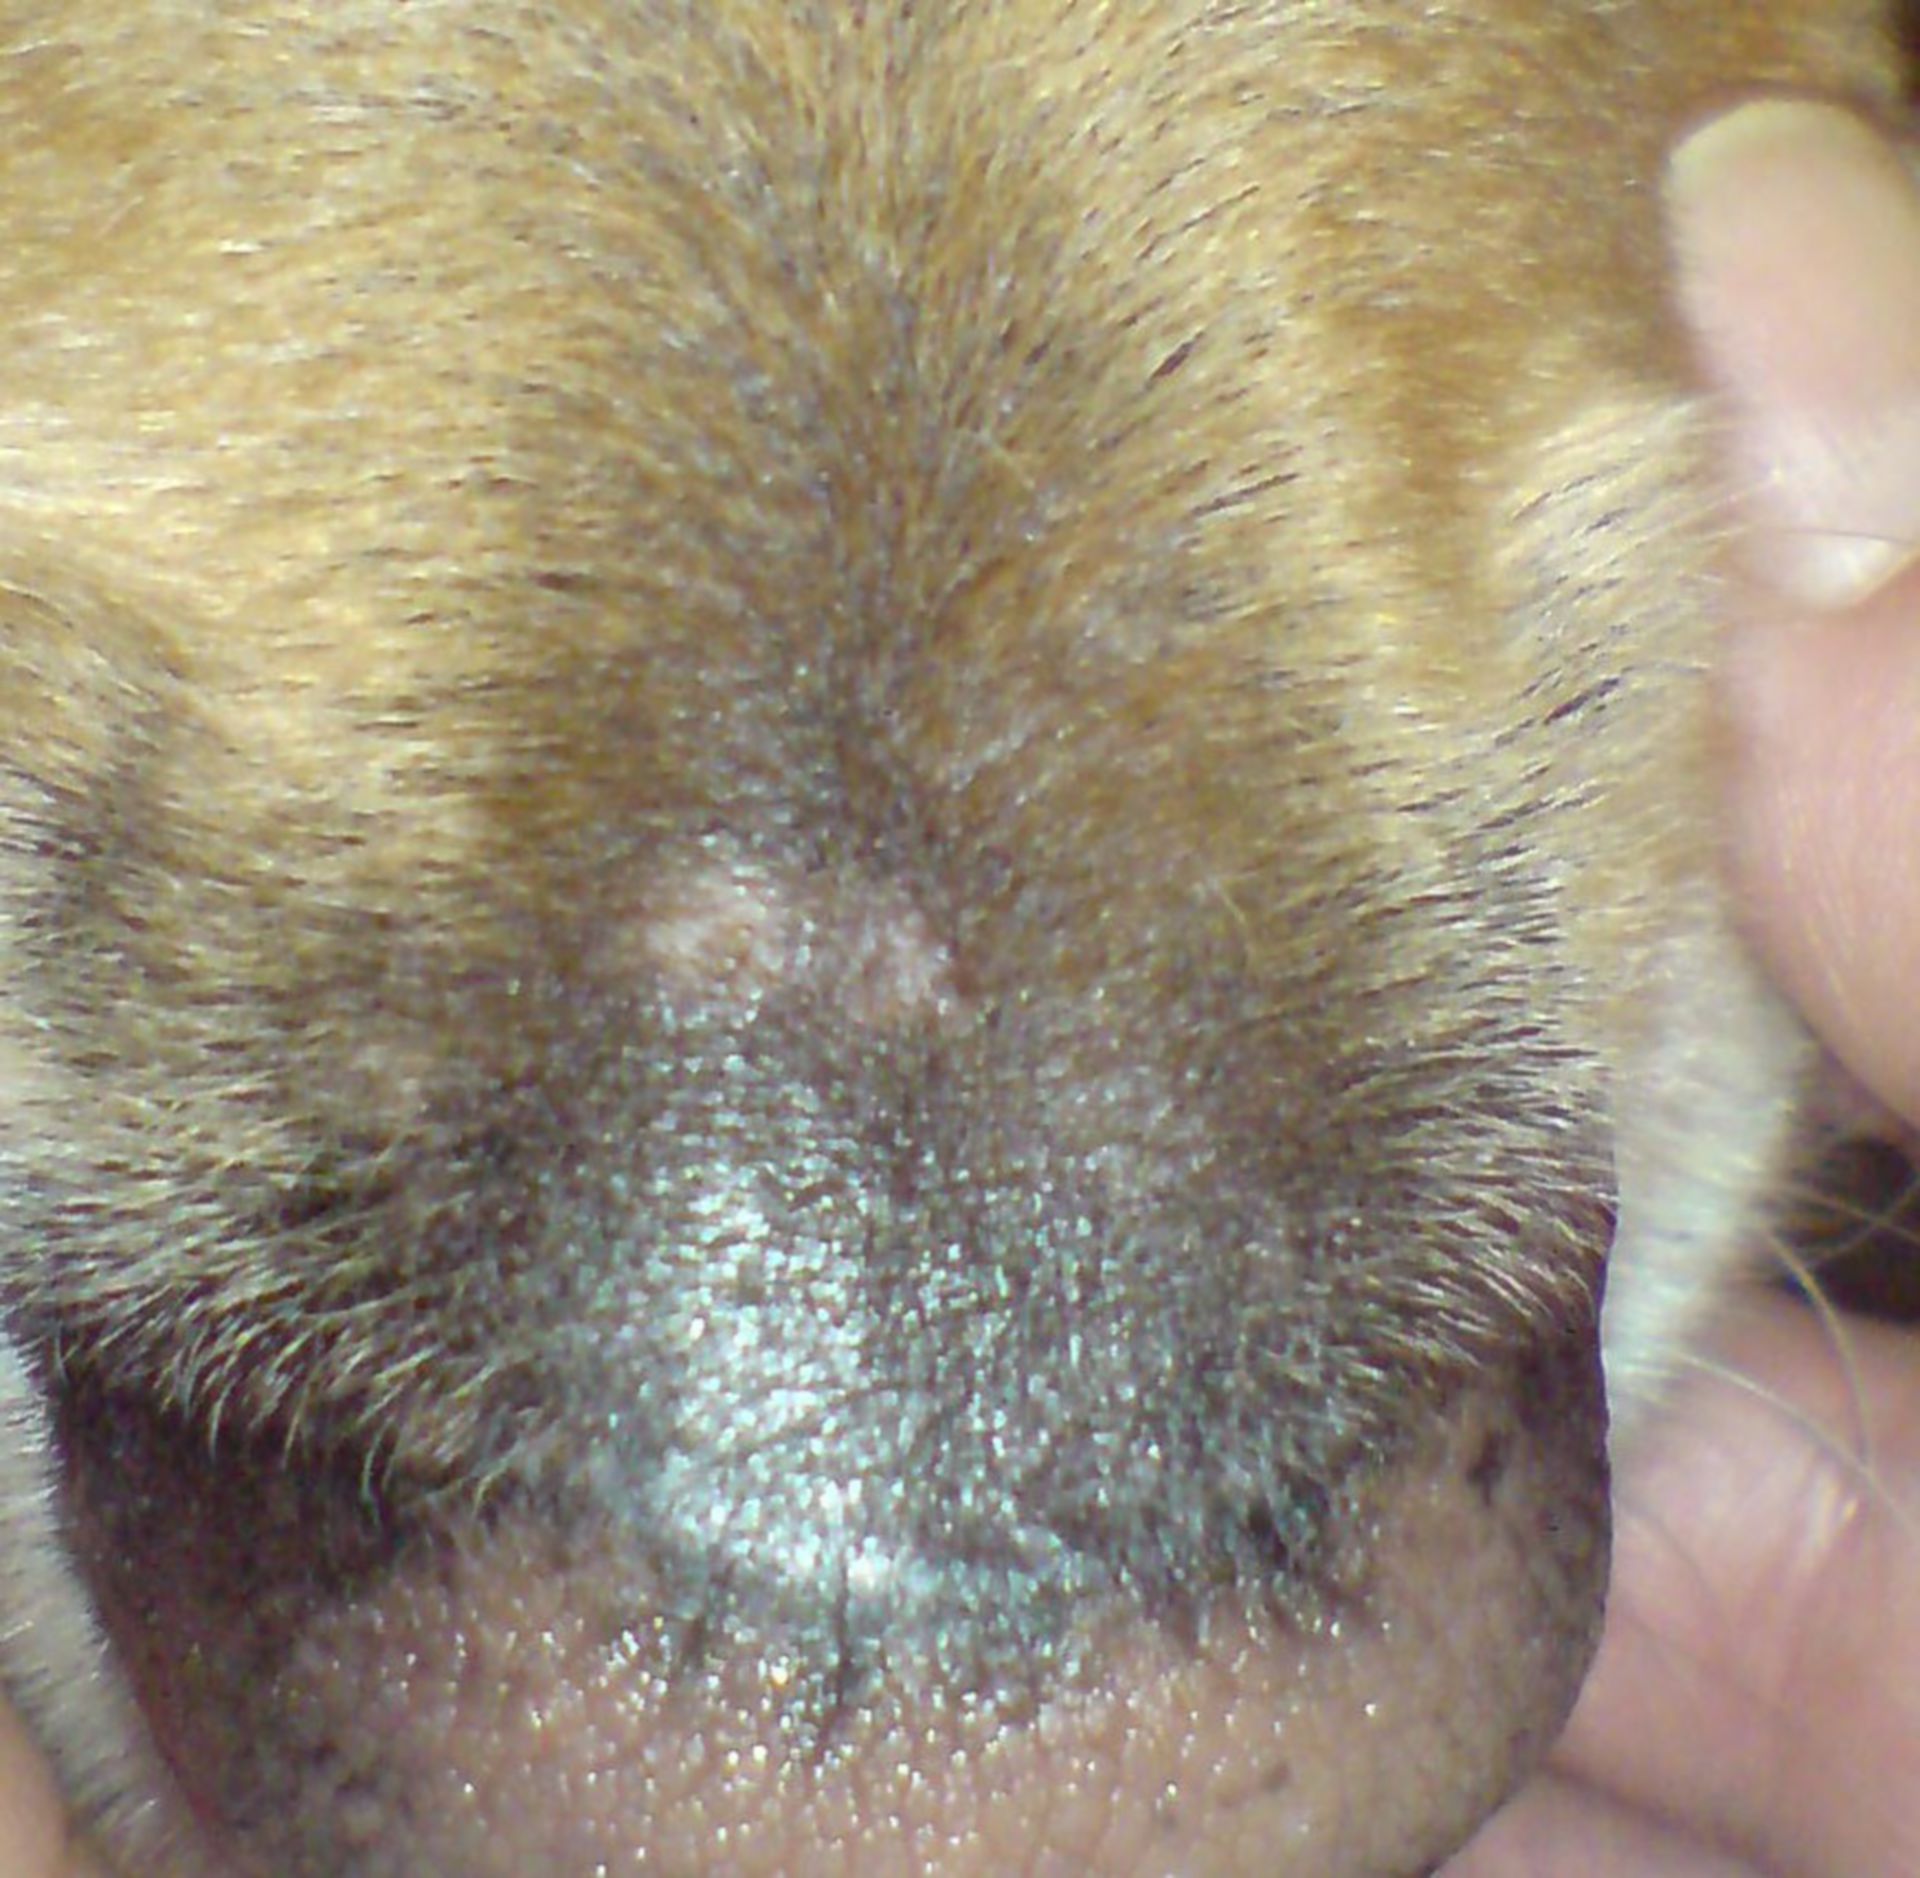 Pet food allergy - alopecia of the nose